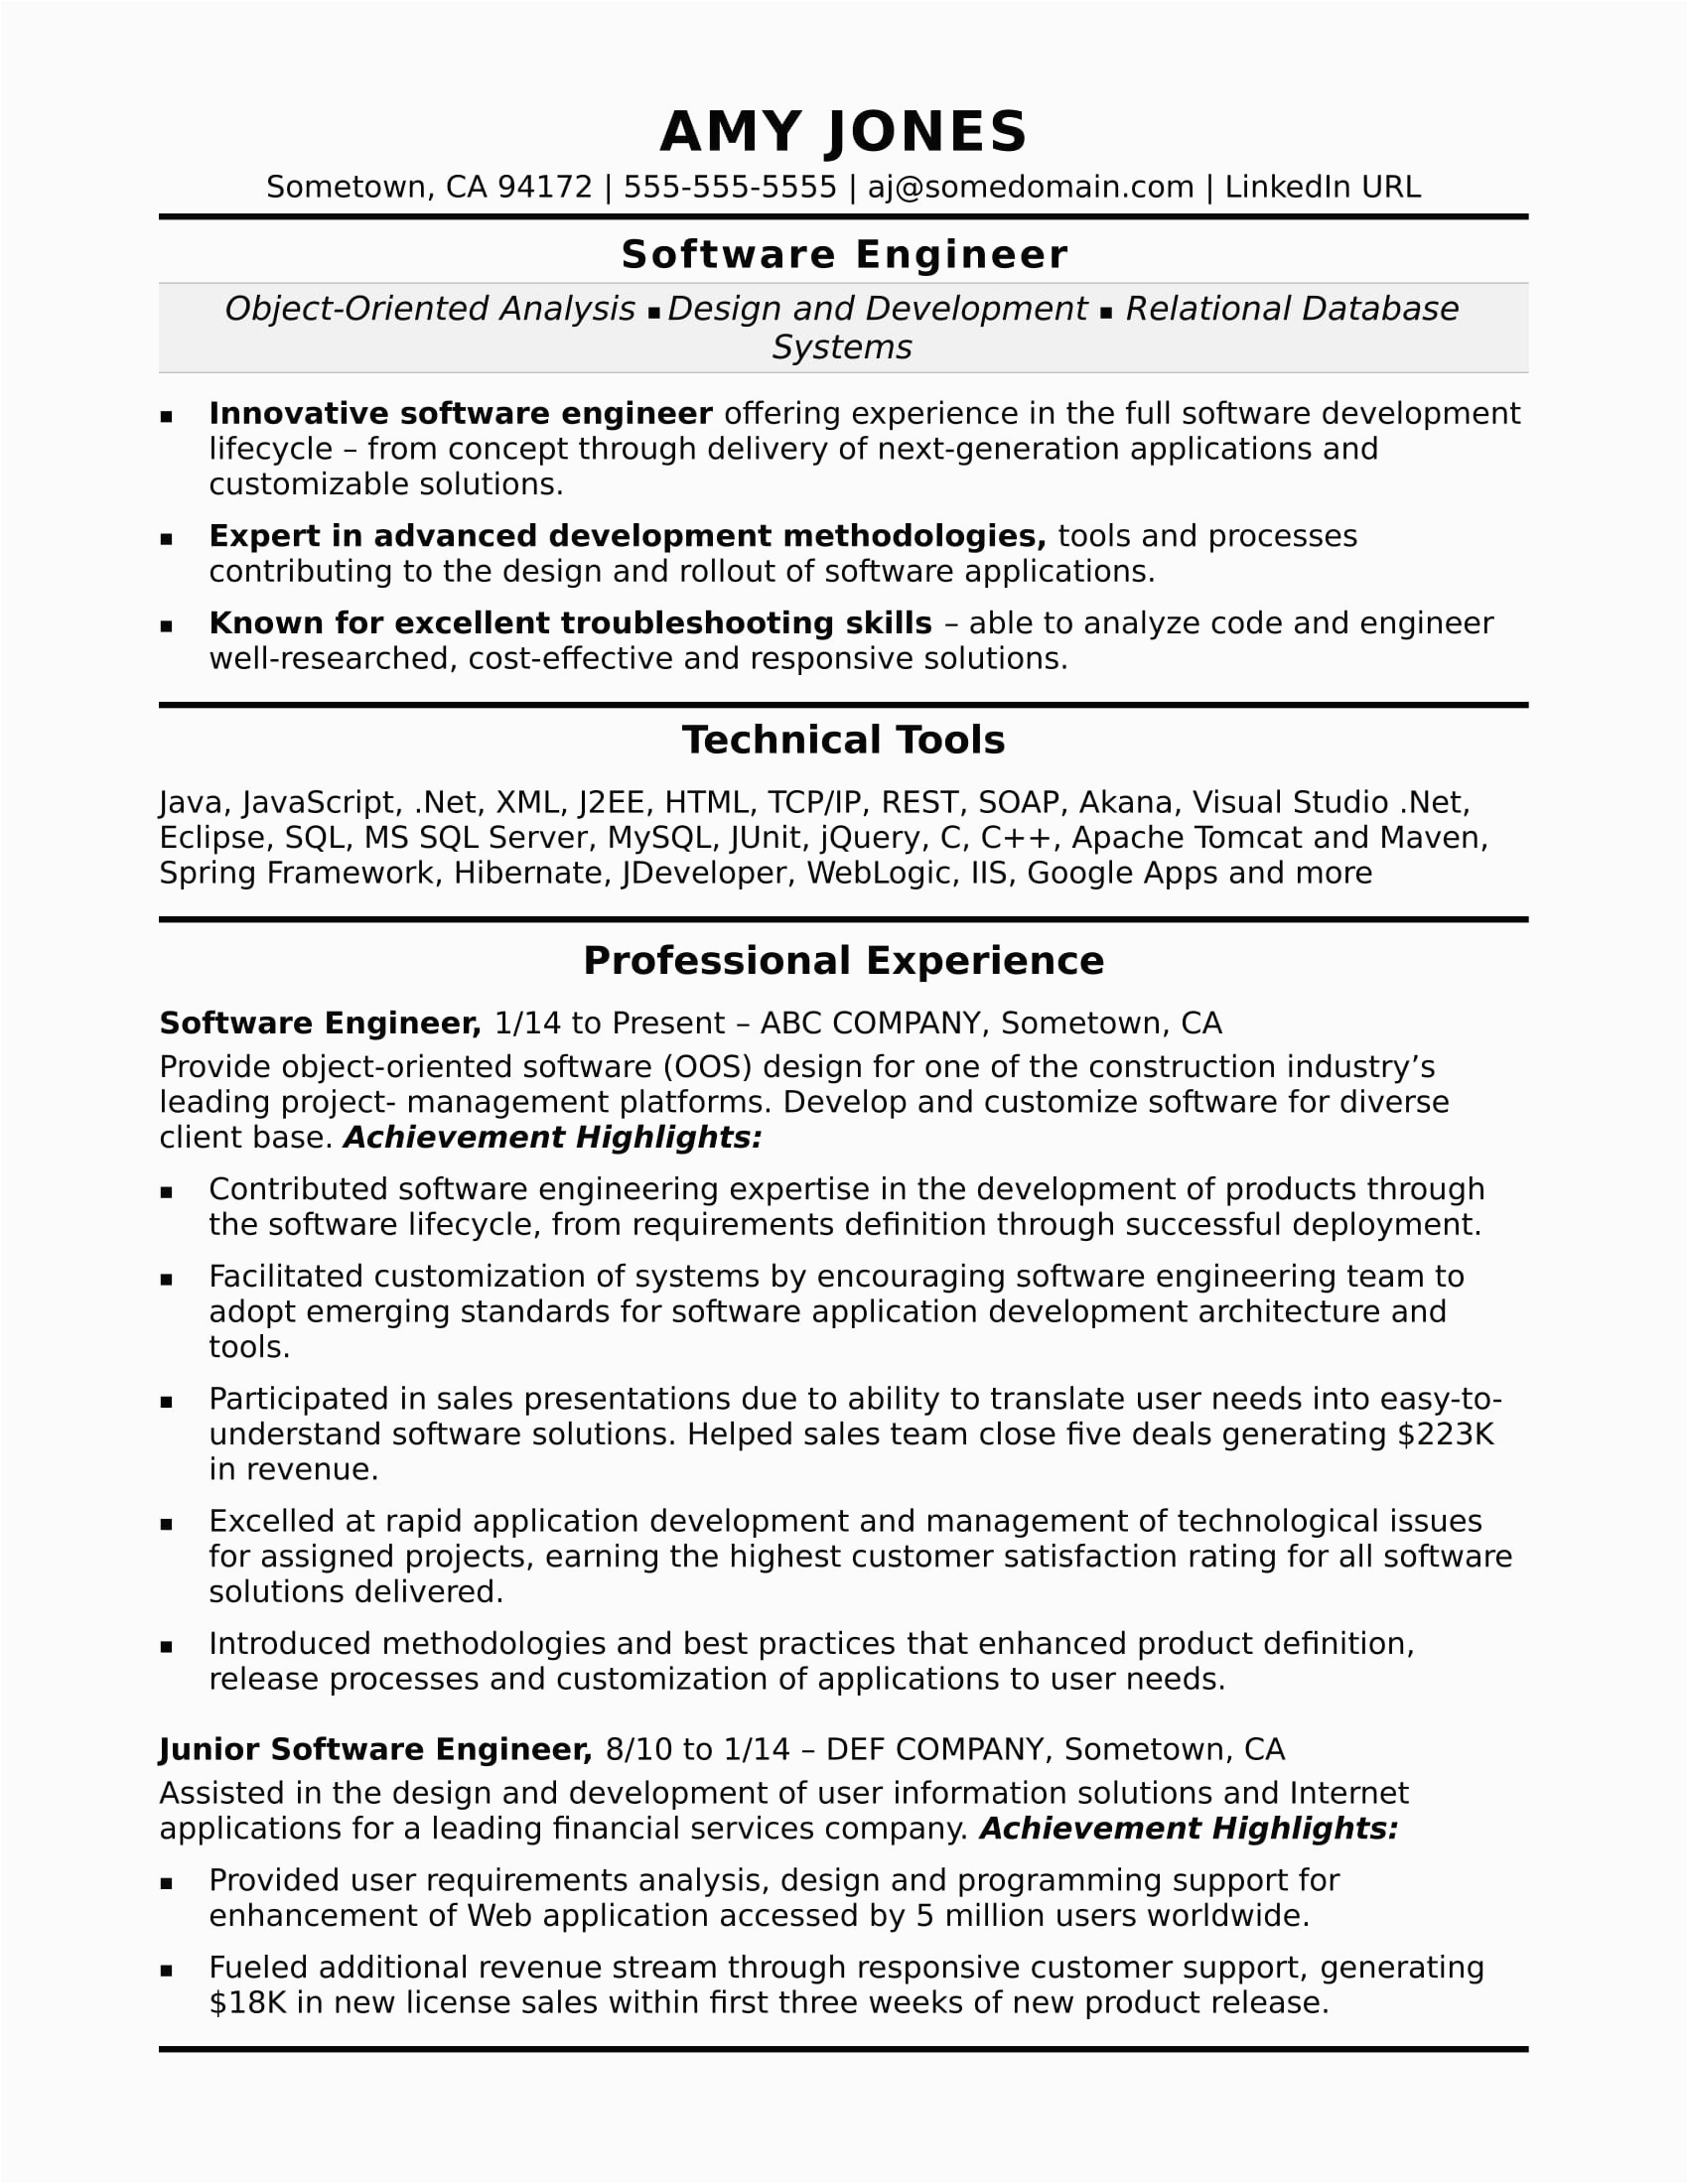 Sample Resume for One Year Experienced software Engineer Sample Resume for E Year Experienced software Engineer